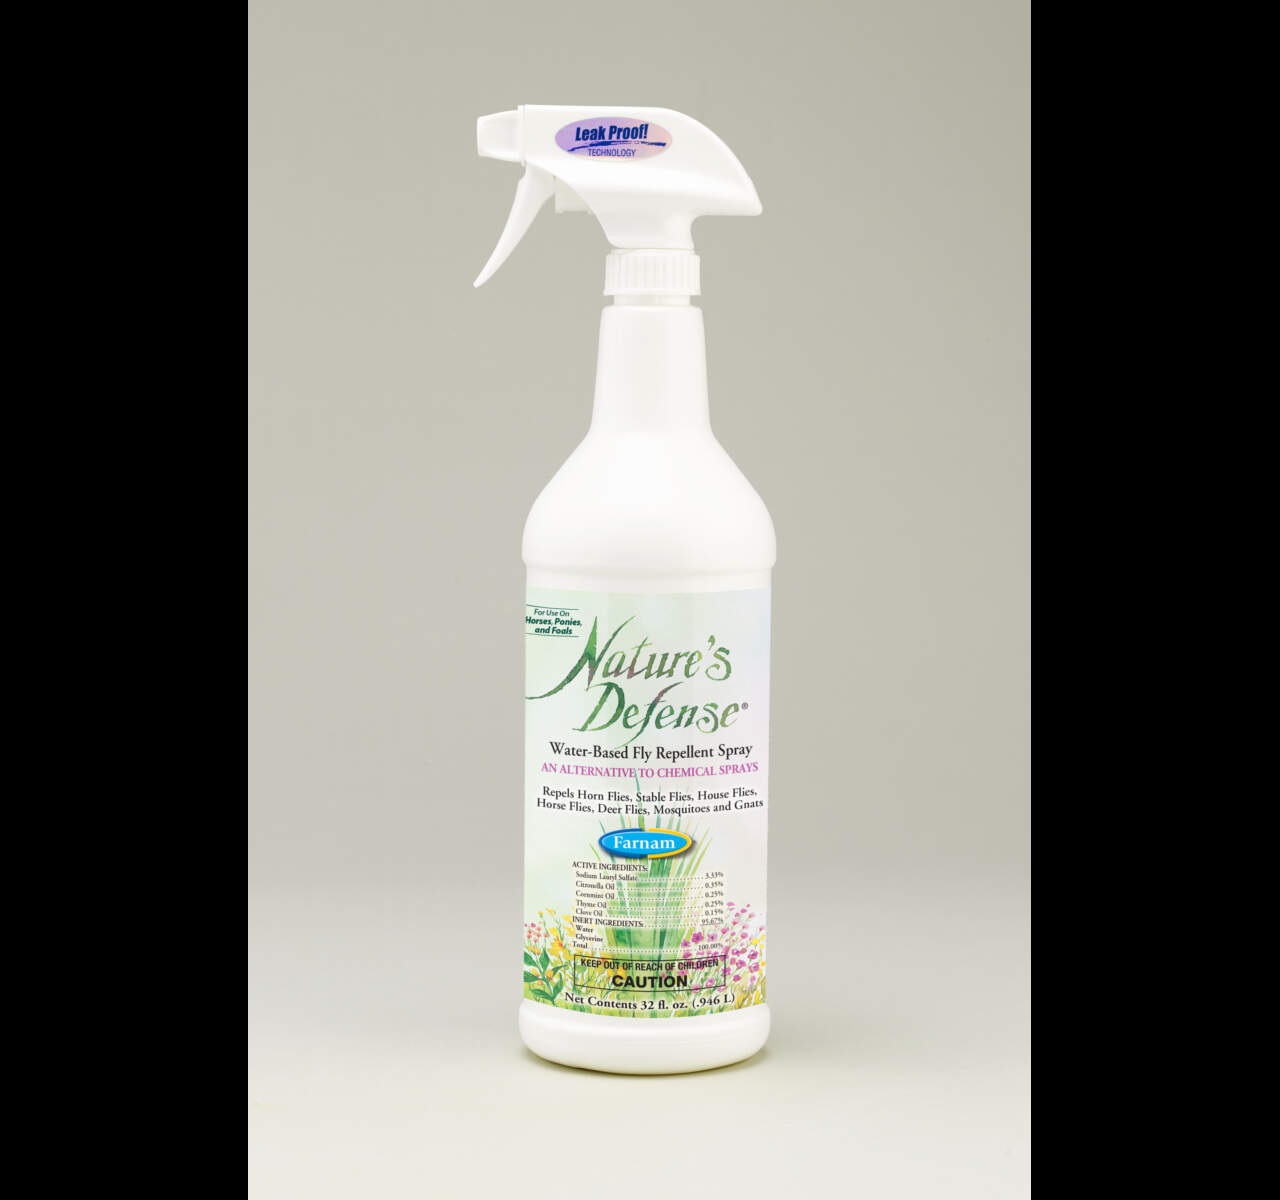 Natures-Defense_32-oz_12012_Product-Image-png